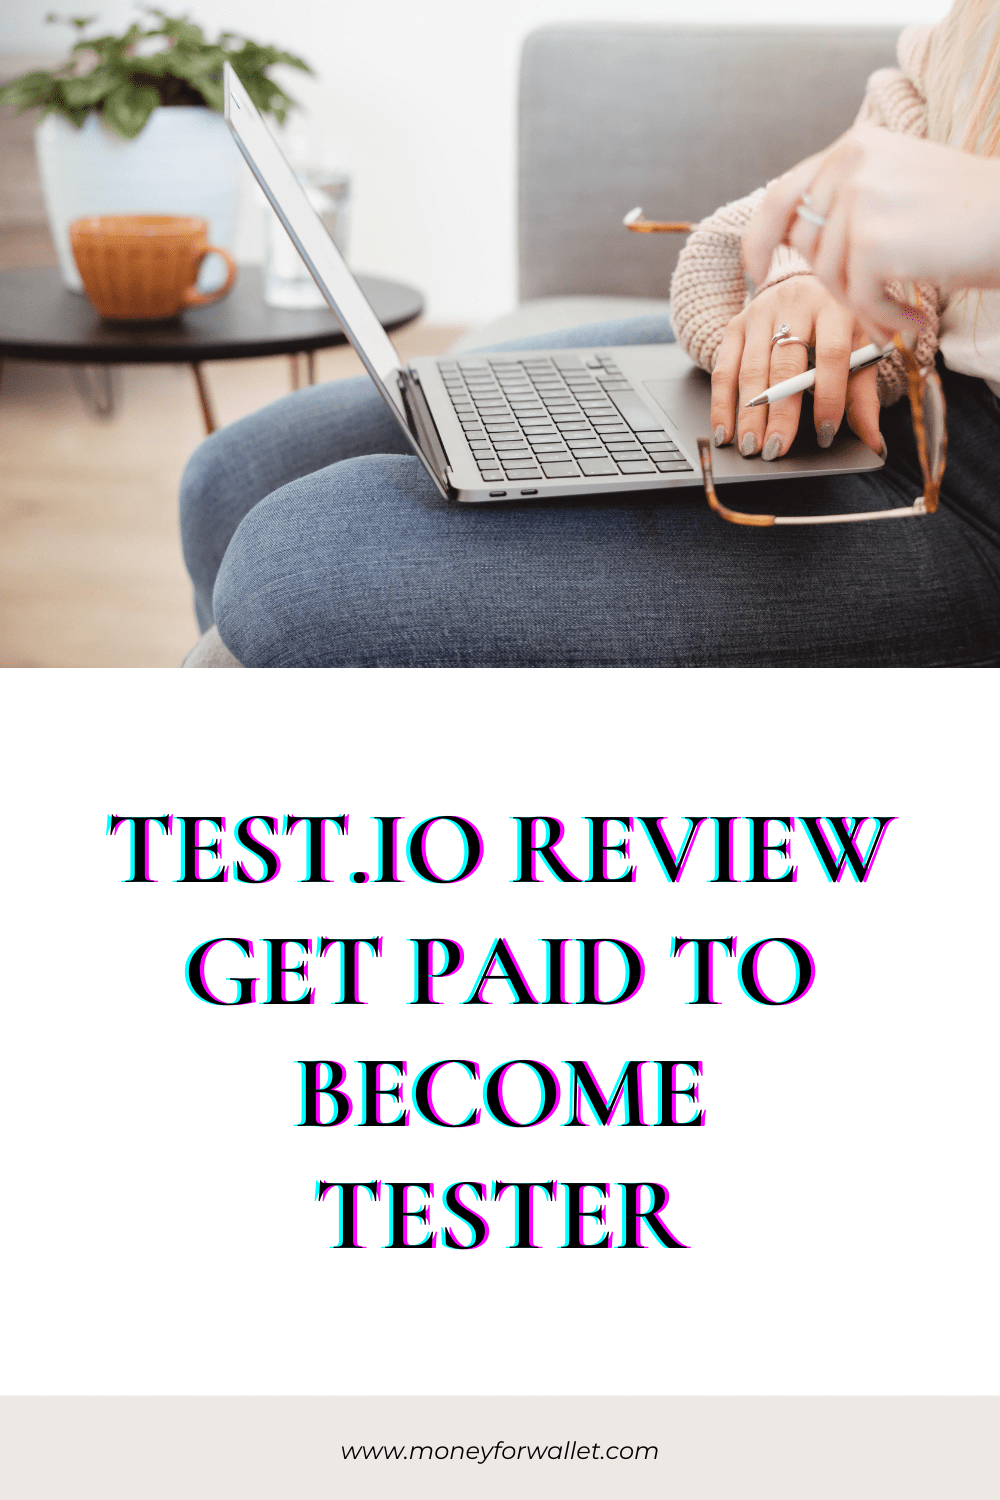 Test.io Review